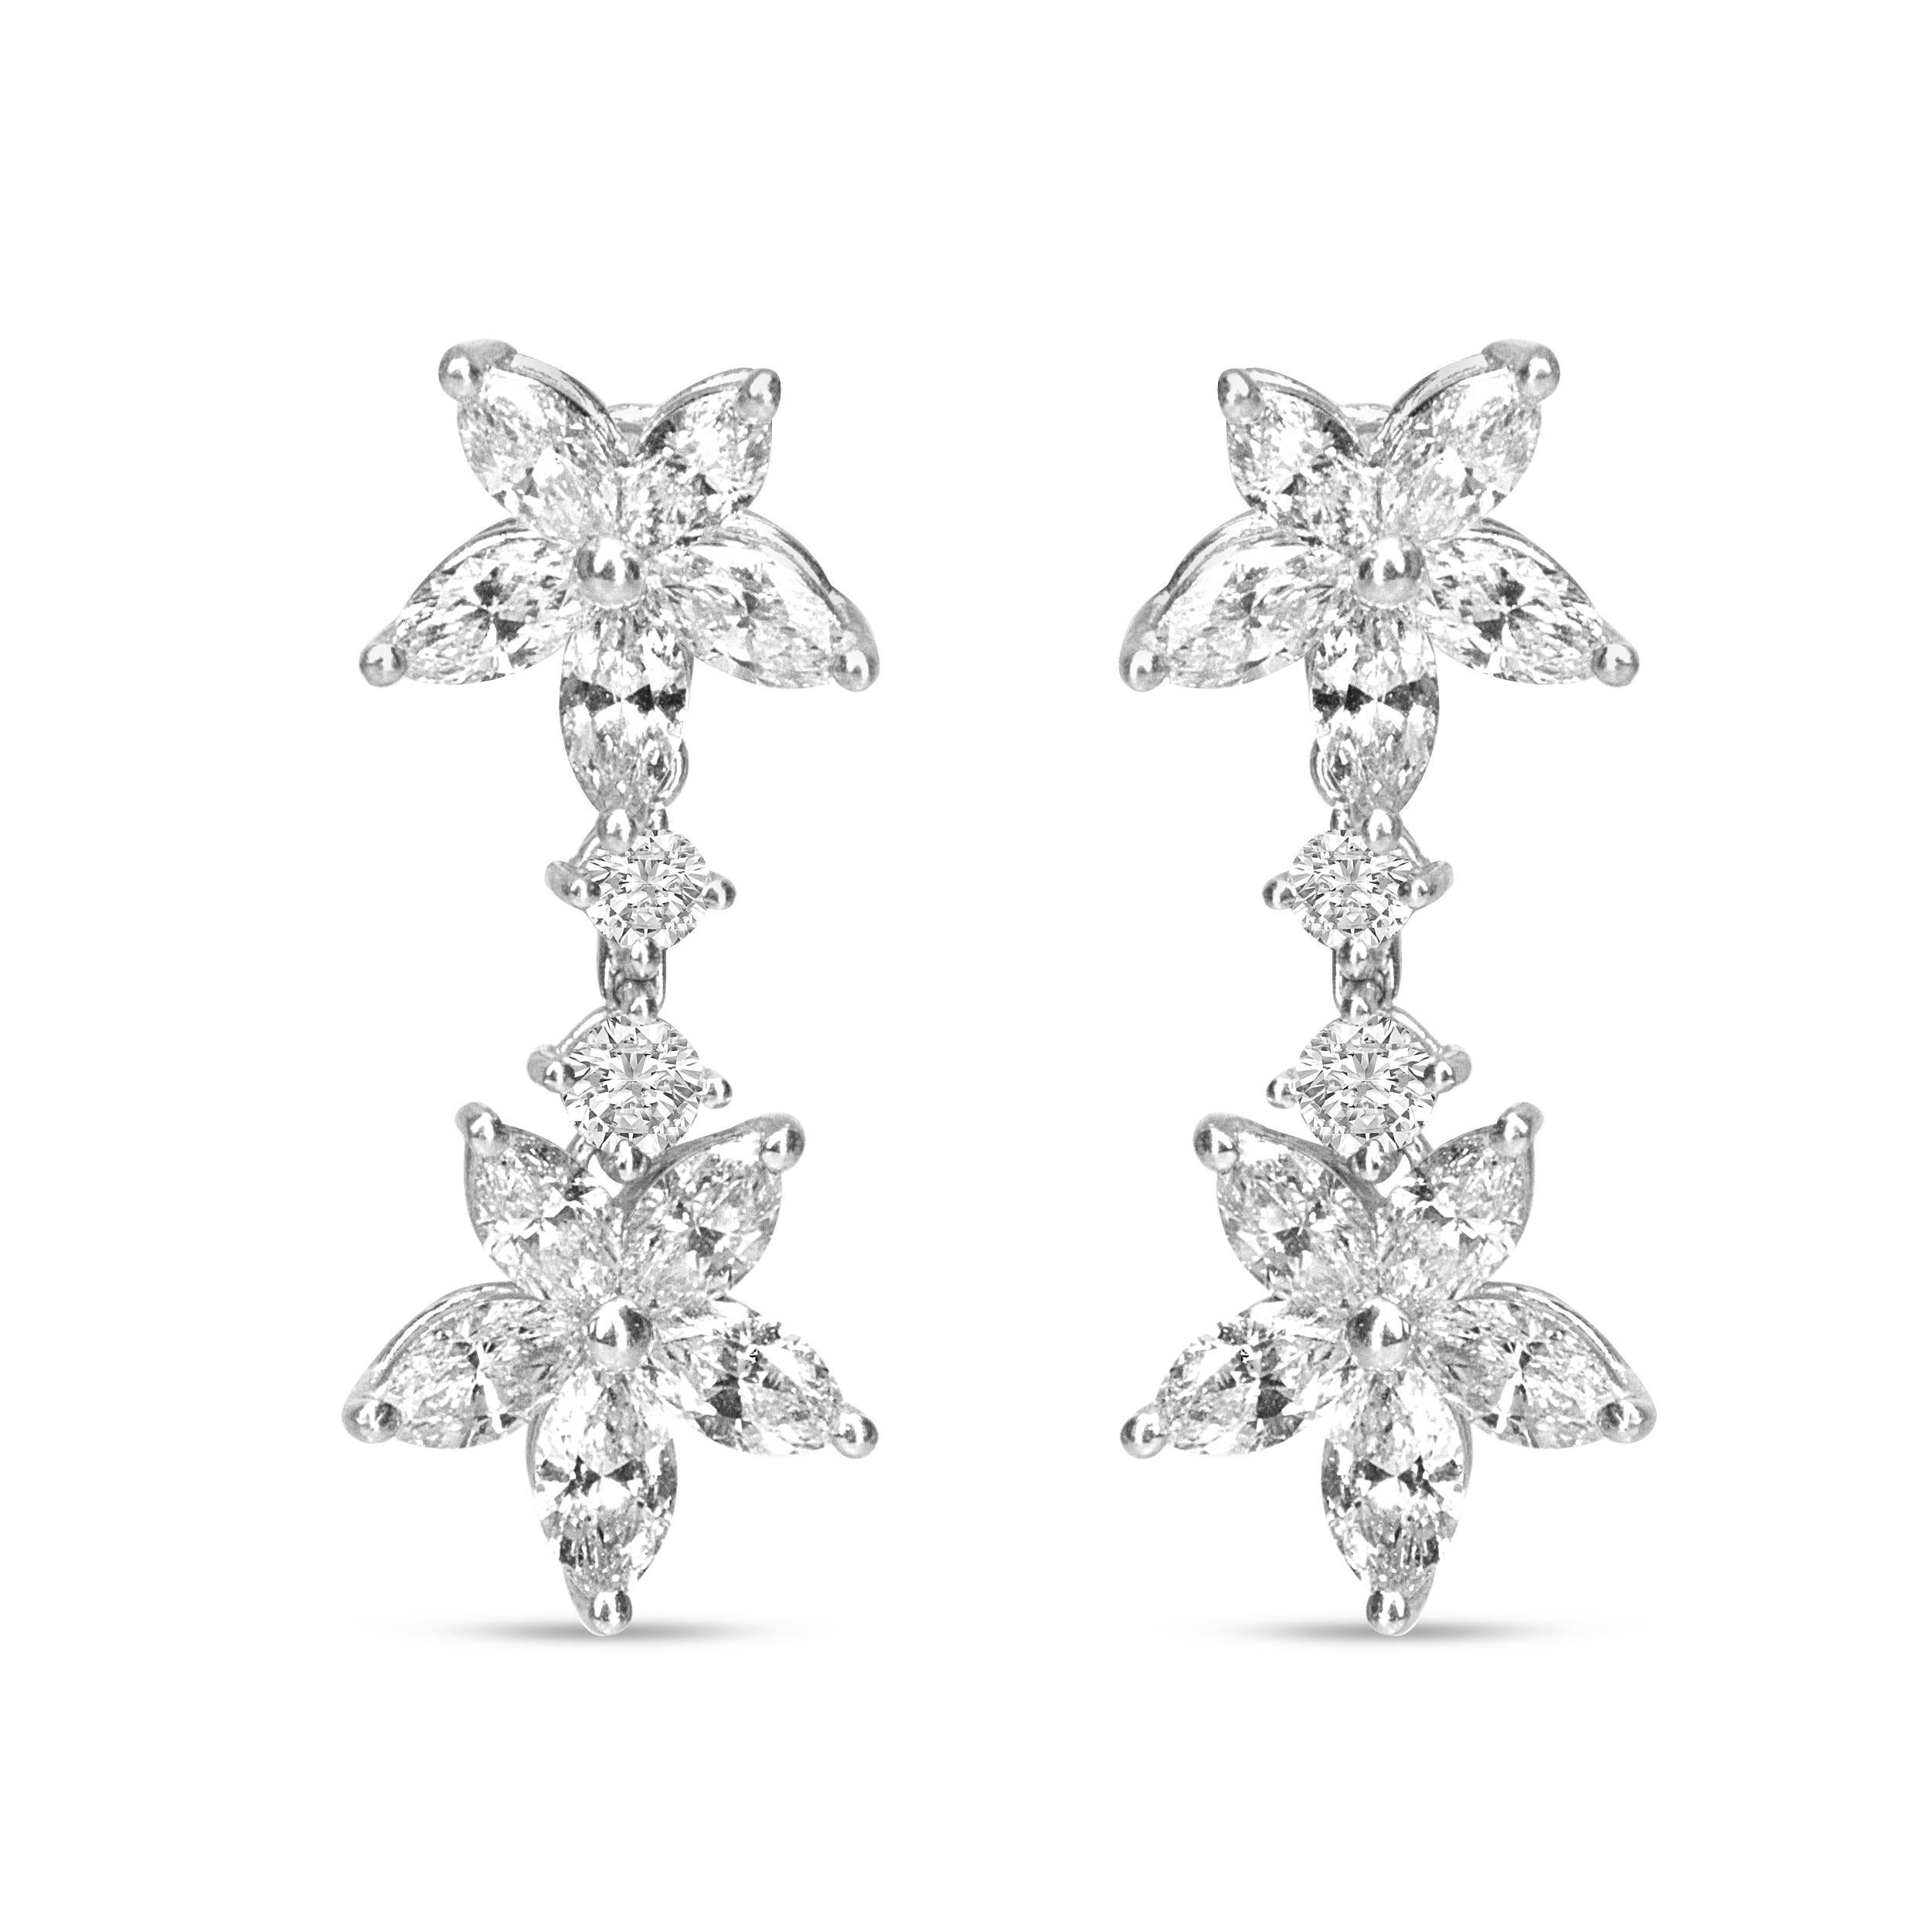 These enchanting marquise diamond floral dangle drop earrings are elegantly feminine, crafted in a design inspired by Mother Nature's artful handiwork. Sparkling, prong-set marquise diamonds form the basis of each blooming flower to become the very